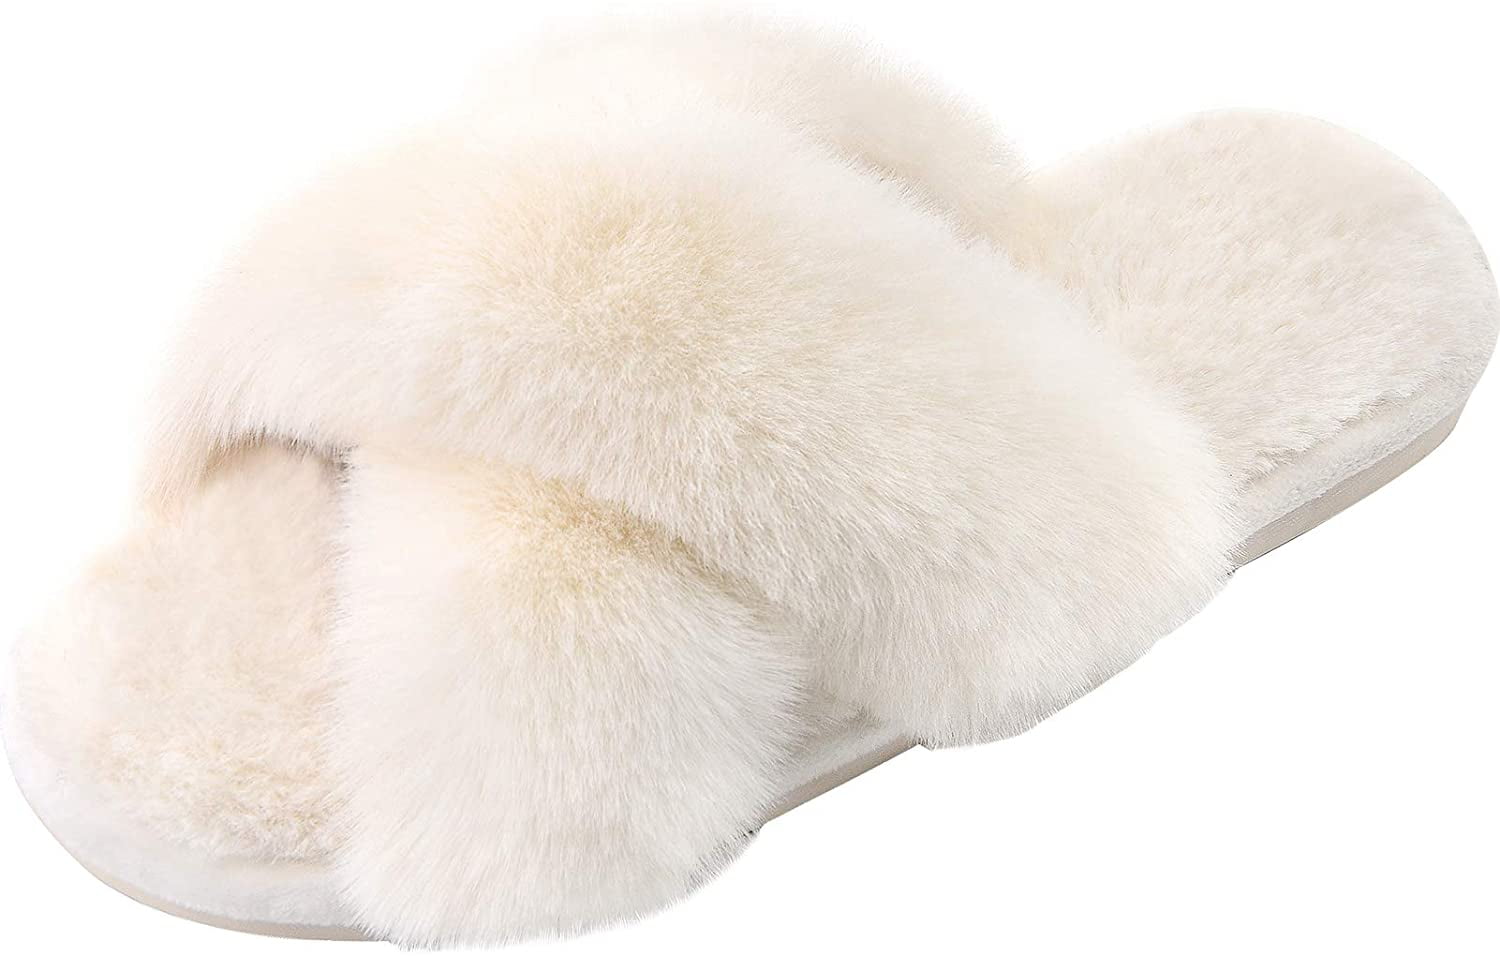 Women/'s Cross Band Slippers Soft Plush Furry Cozy Open Toe House Shoes Indoor Outdoor Faux Rabbit Fur Warm Comfy Slip On Breathable